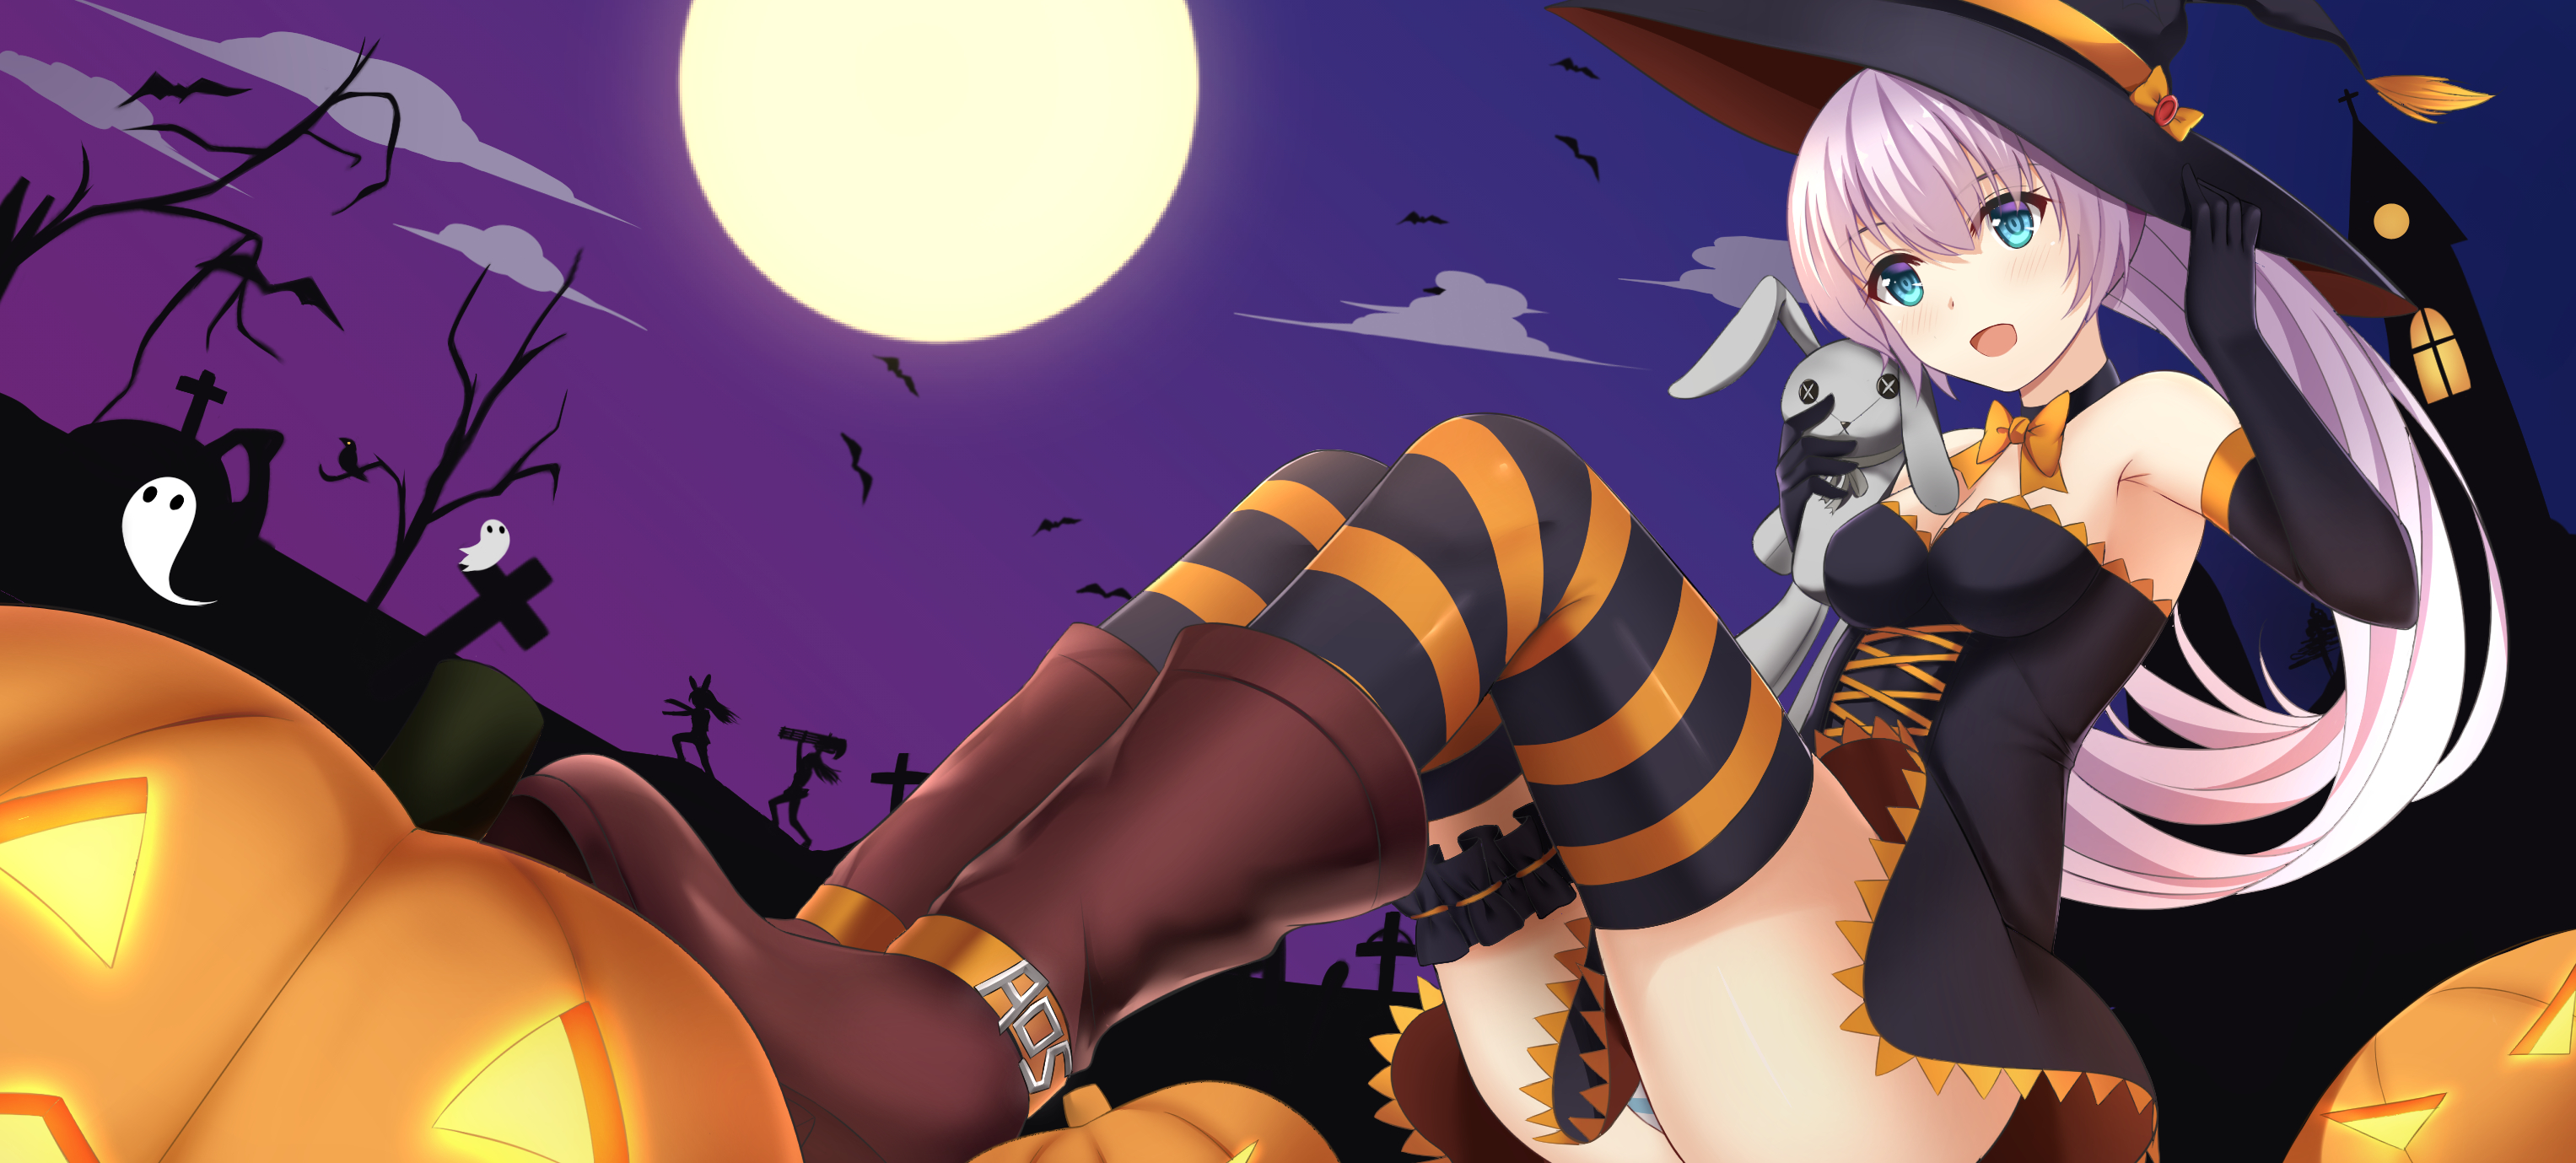 Anime 3054x1379 pumpkin witch hat hat witch Halloween dress panties striped panties thigh-highs